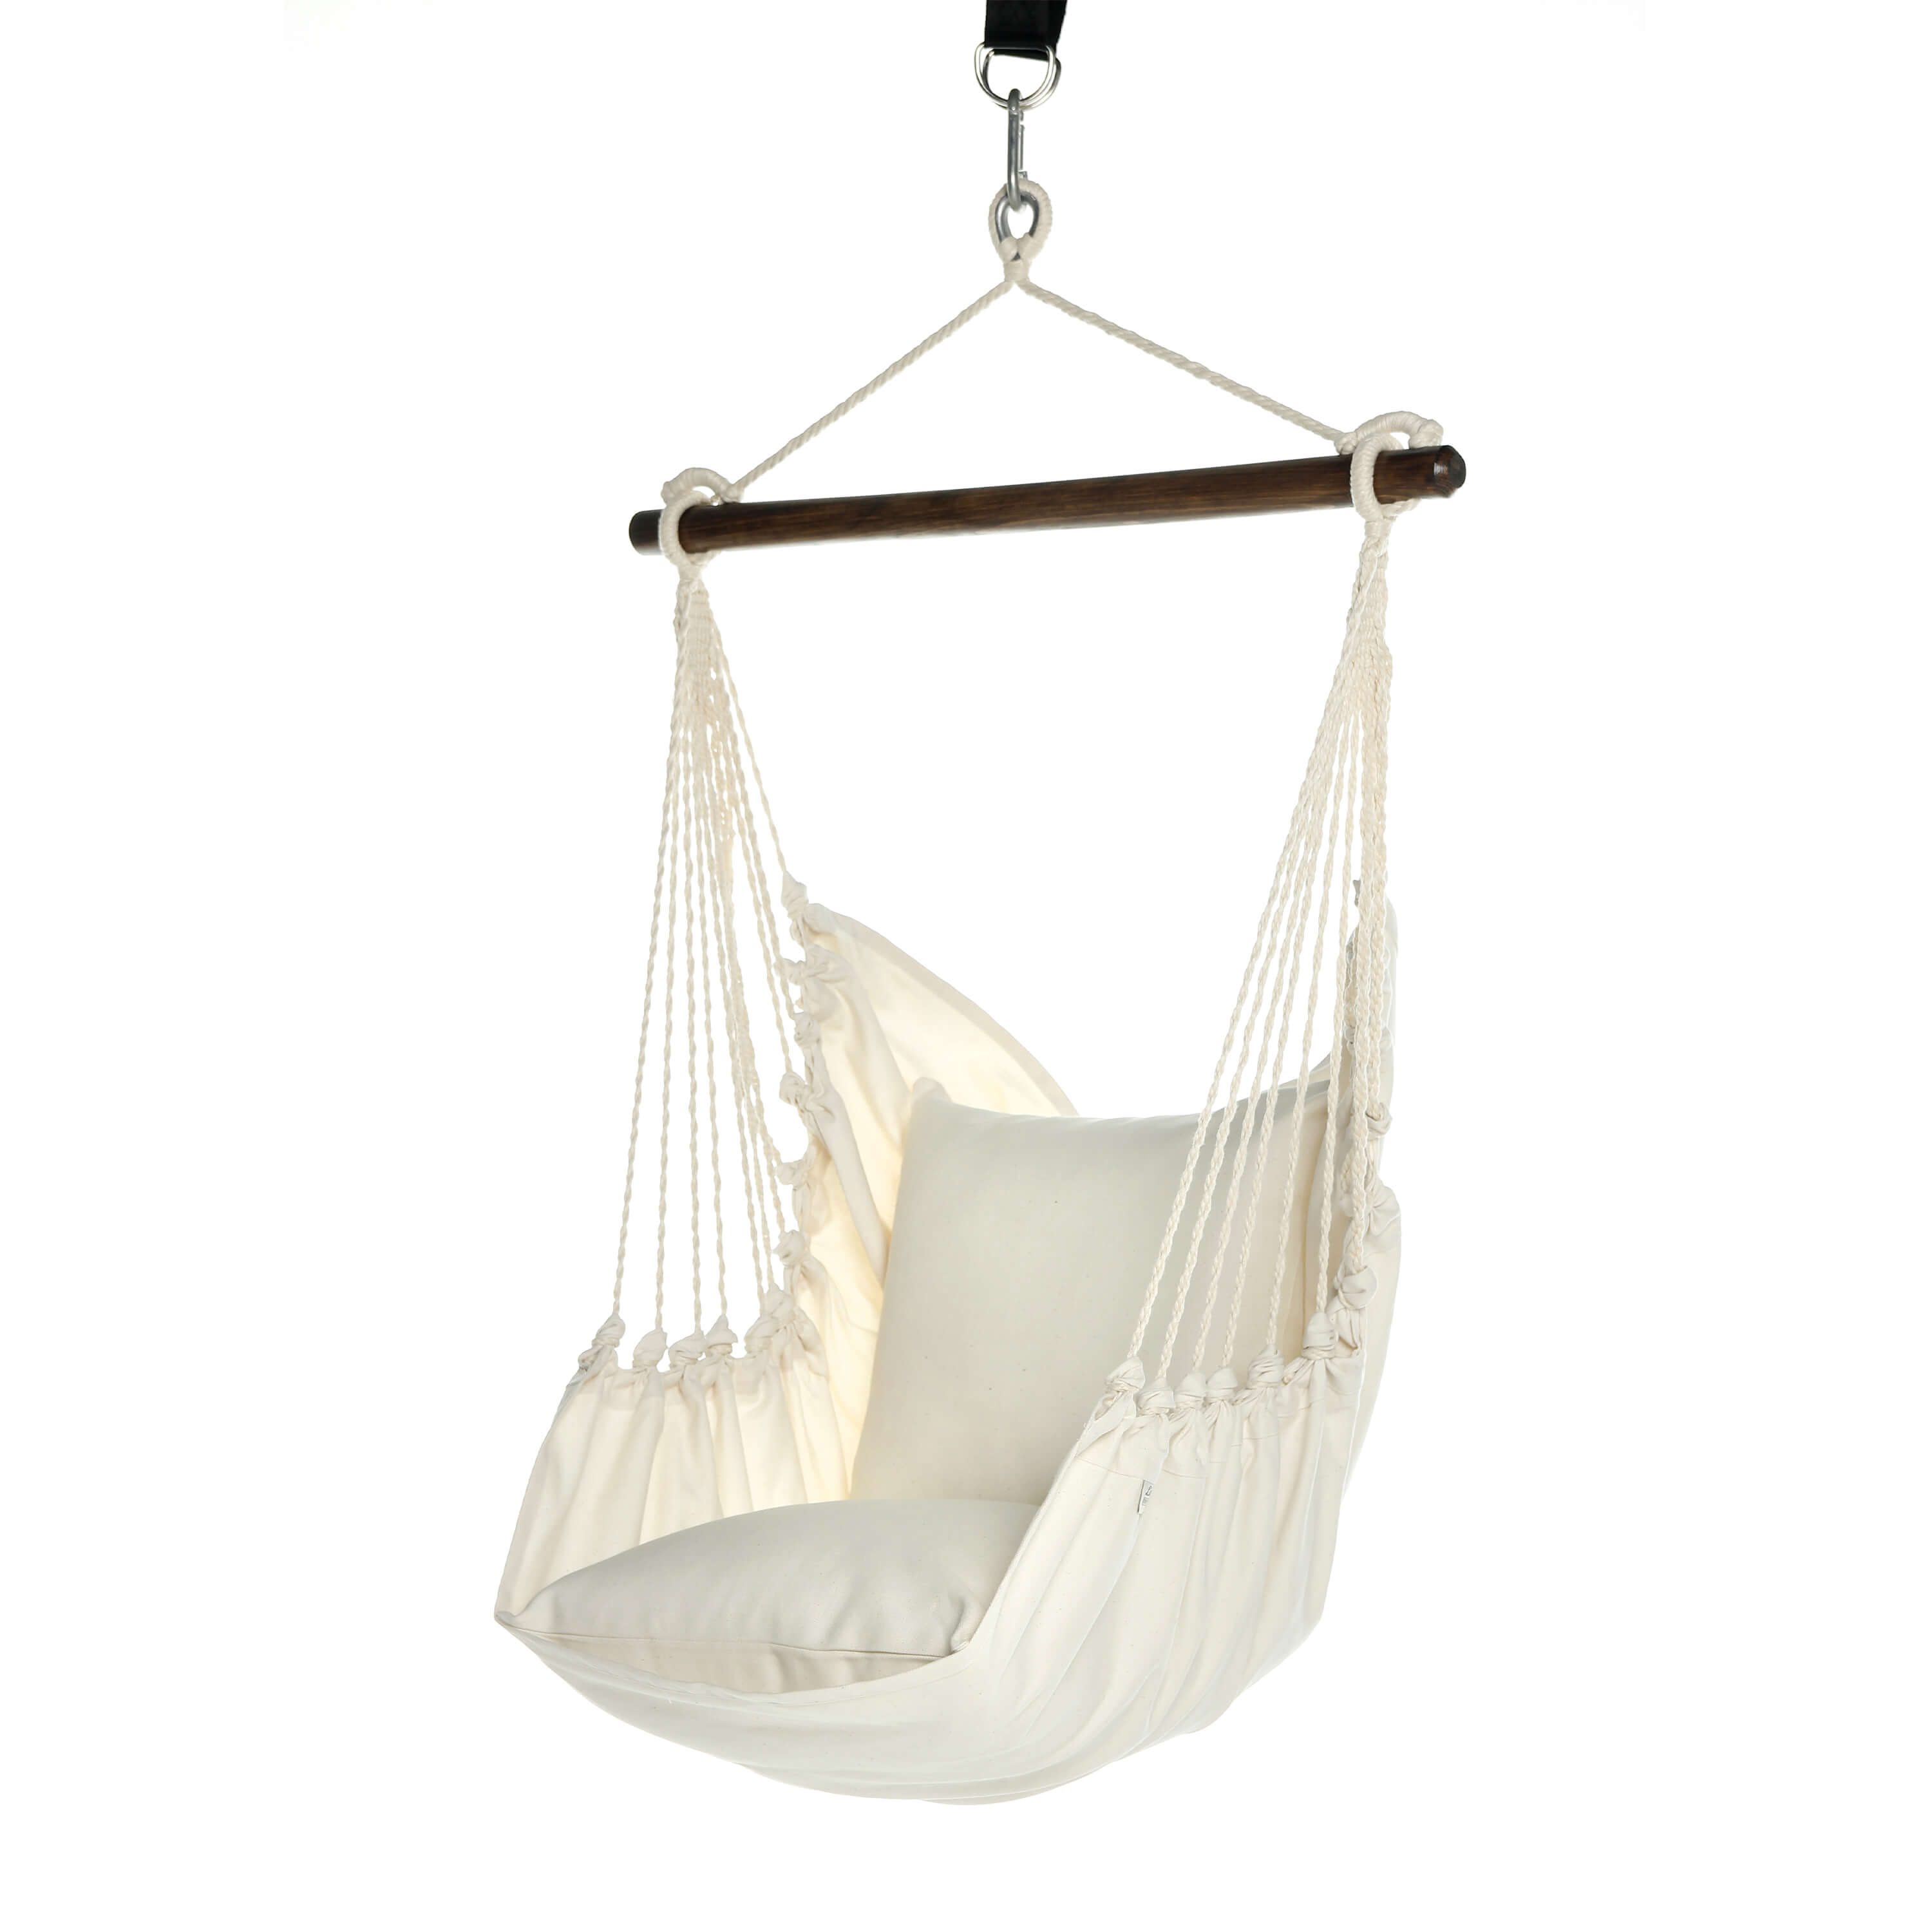 5 design hammocks to swing along and idly enjoy the summer!